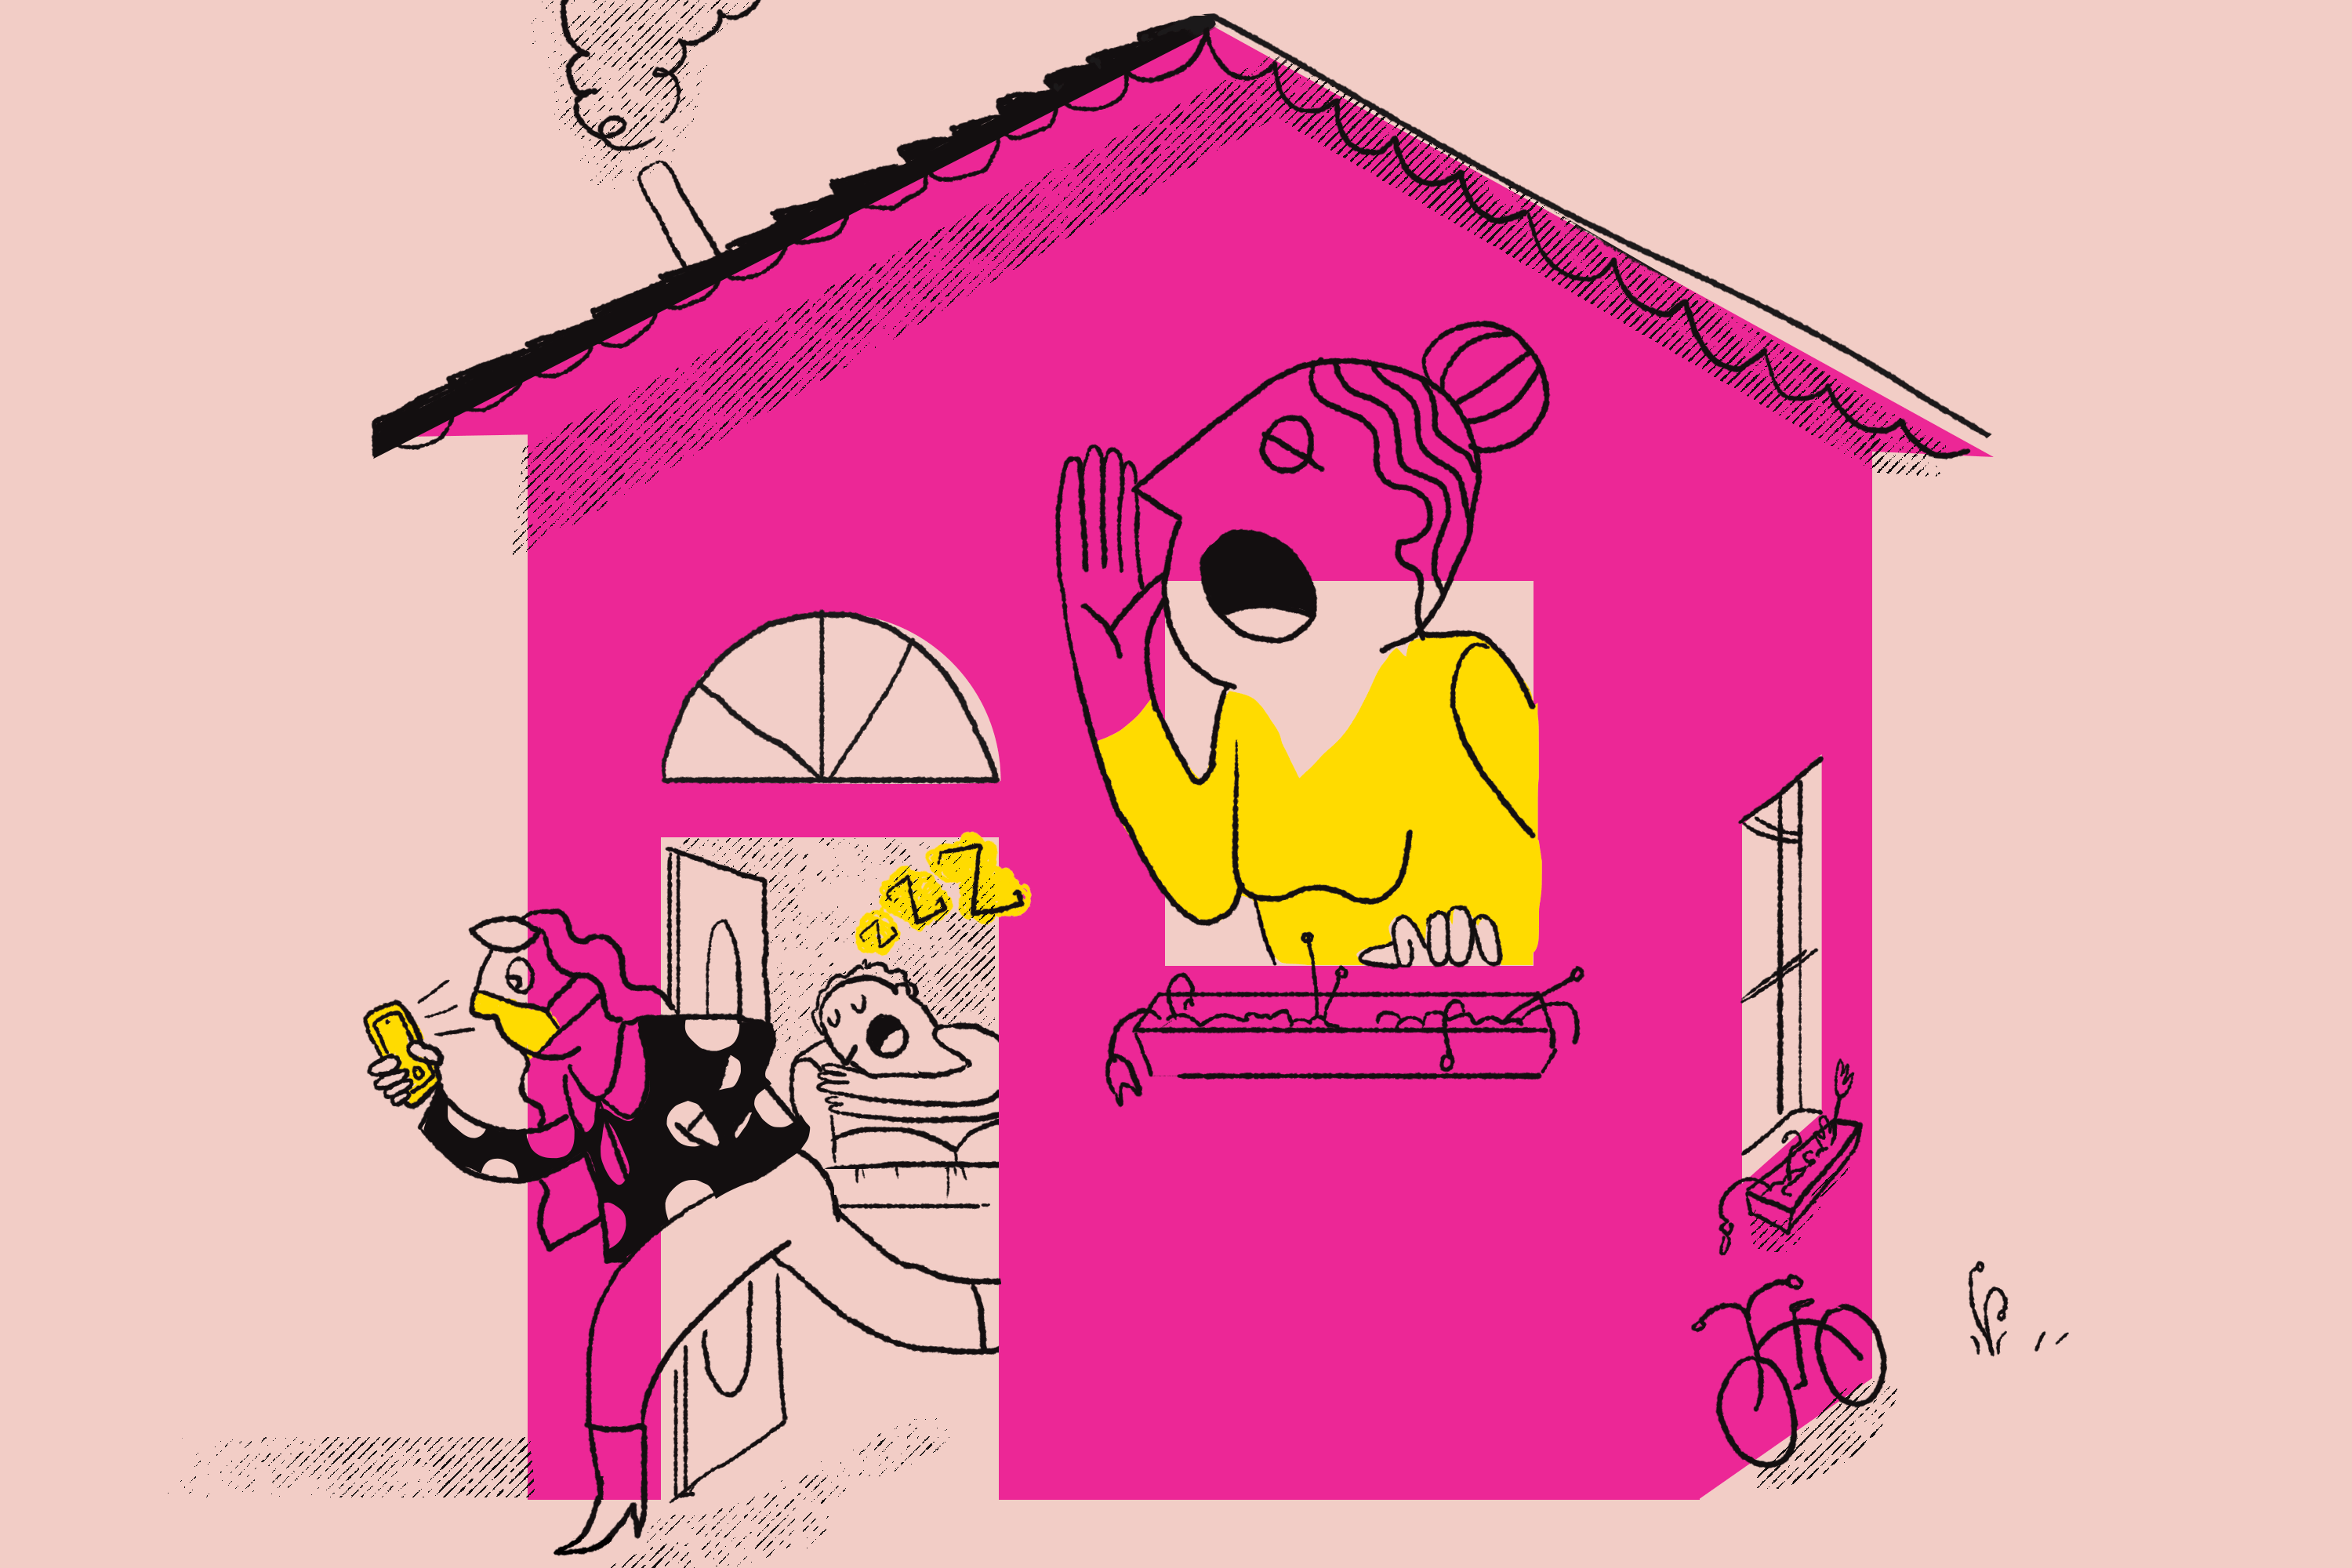 Illustration of a mom yelling out the window of a house, a teen girl sneaking out wearing a mask and looking at her phone, and a teen boy inside sleeping